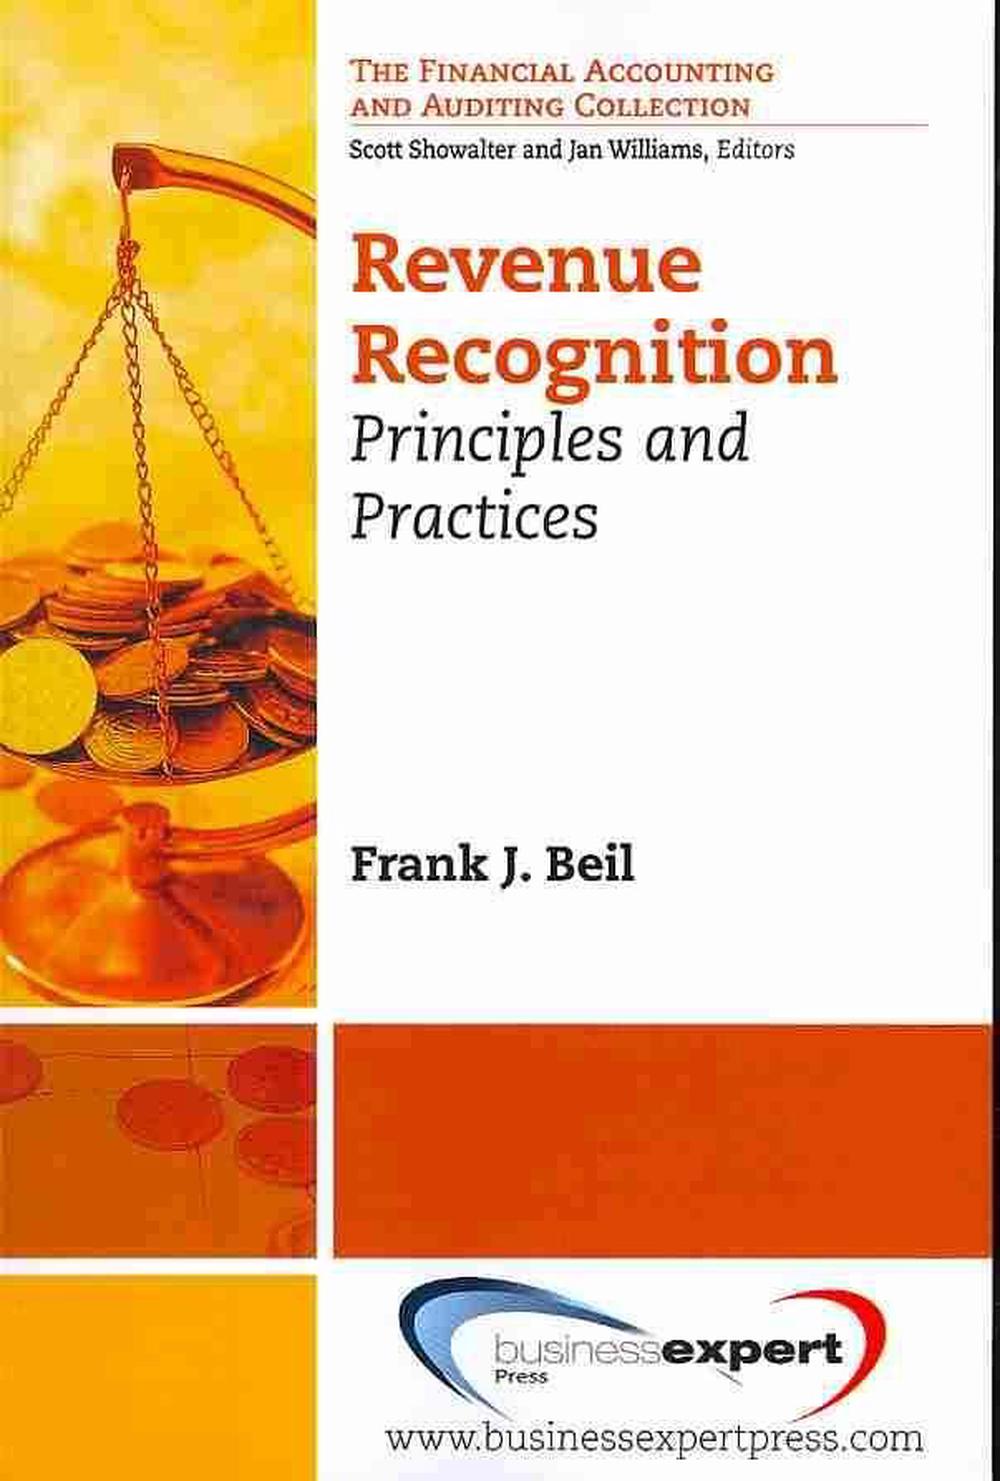 revenue recognition and expense recognition